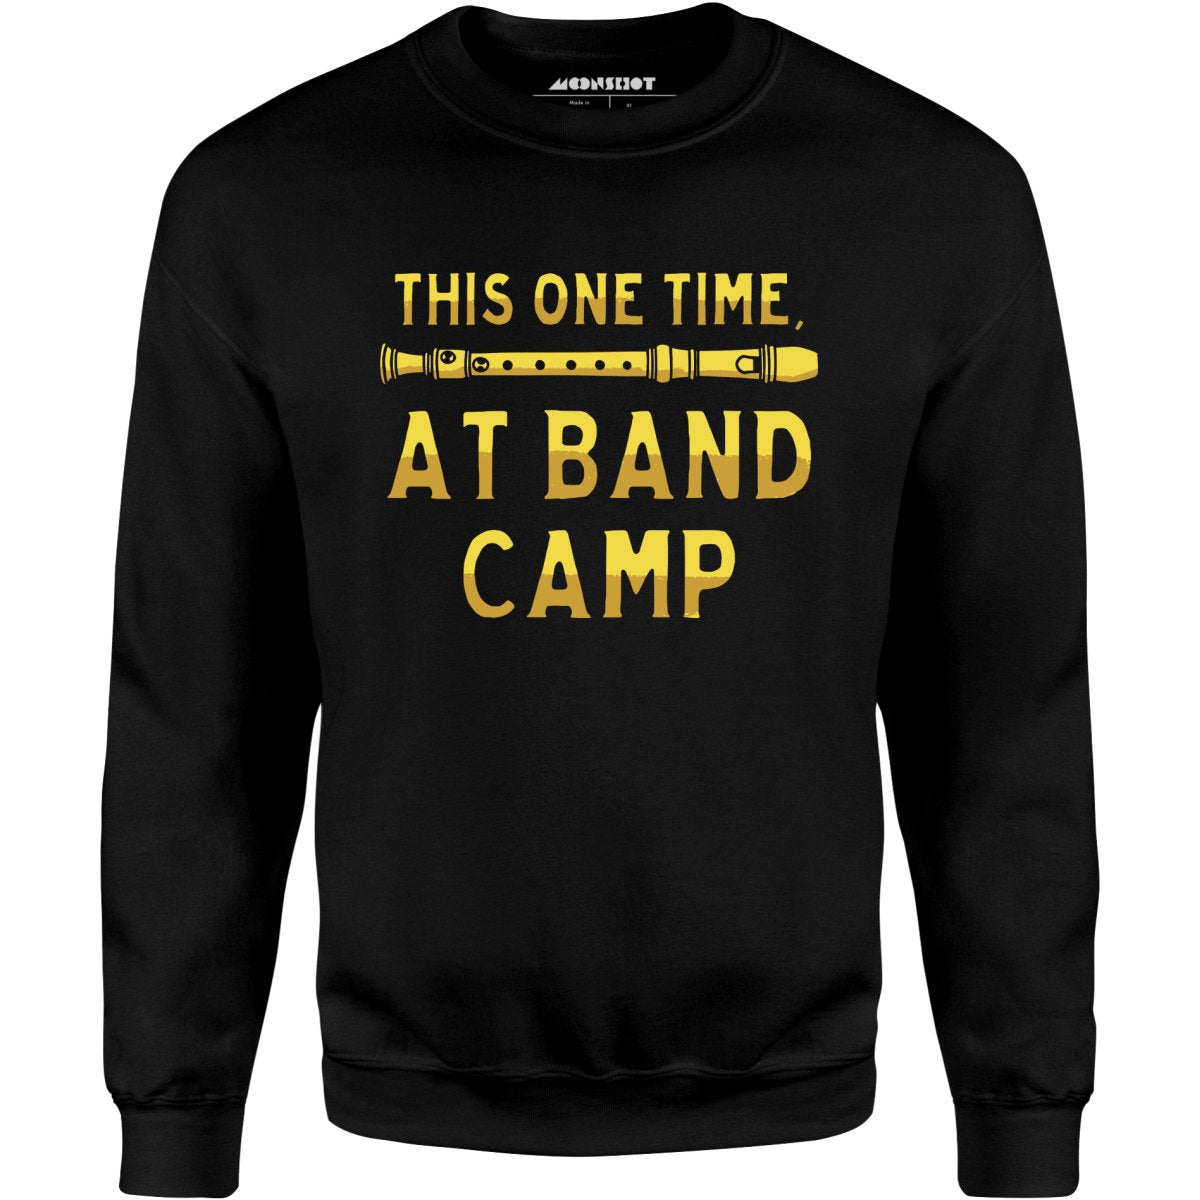 This One Time, at Band Camp - Unisex Sweatshirt